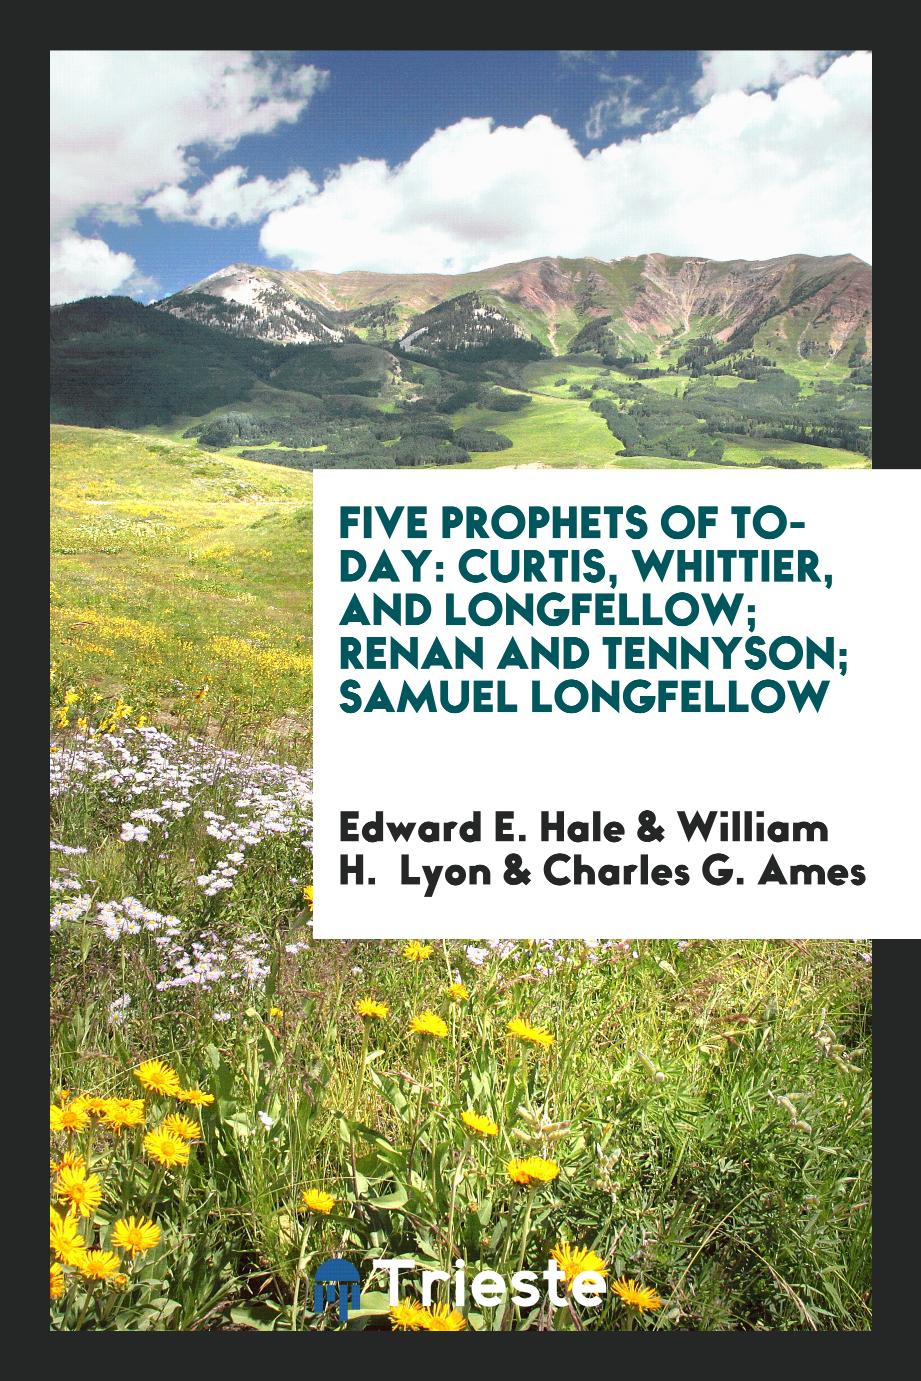 Five Prophets of To-day: Curtis, Whittier, and Longfellow; Renan and Tennyson; Samuel Longfellow